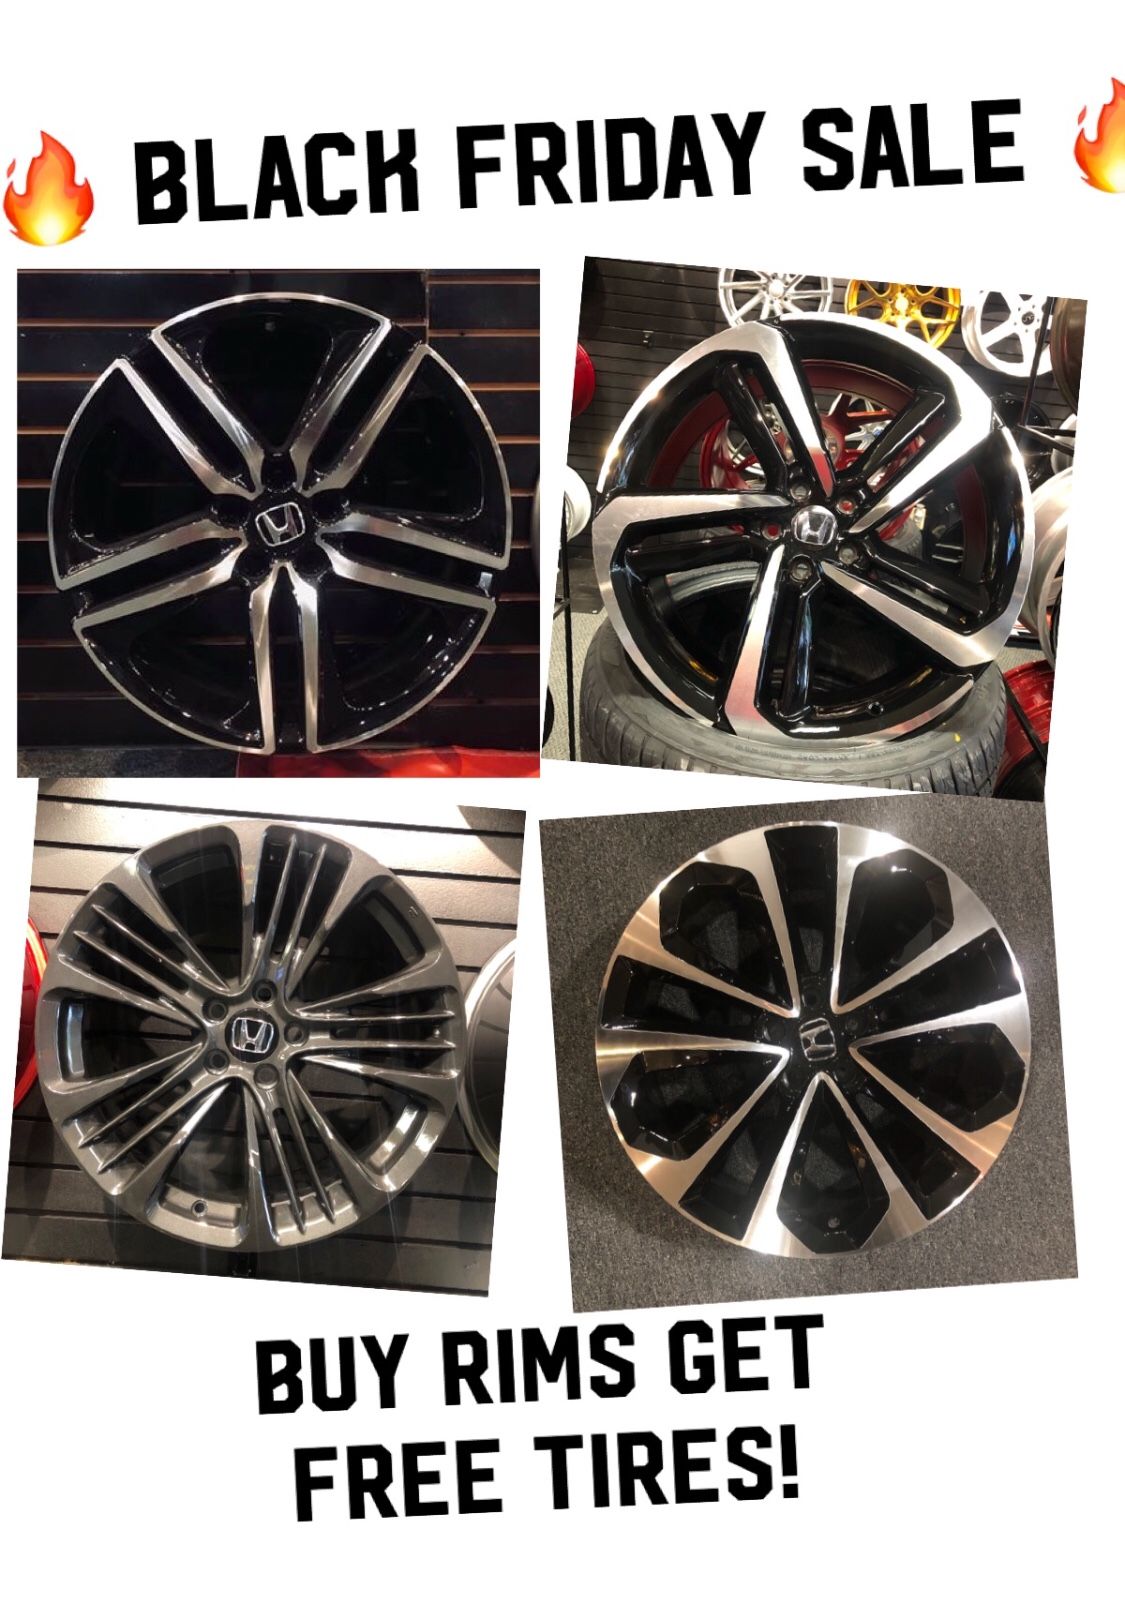 ** BLACK FRIDAY SALE! Buy rims get FREE TIRES ** (only 50 down payment / no credit check)